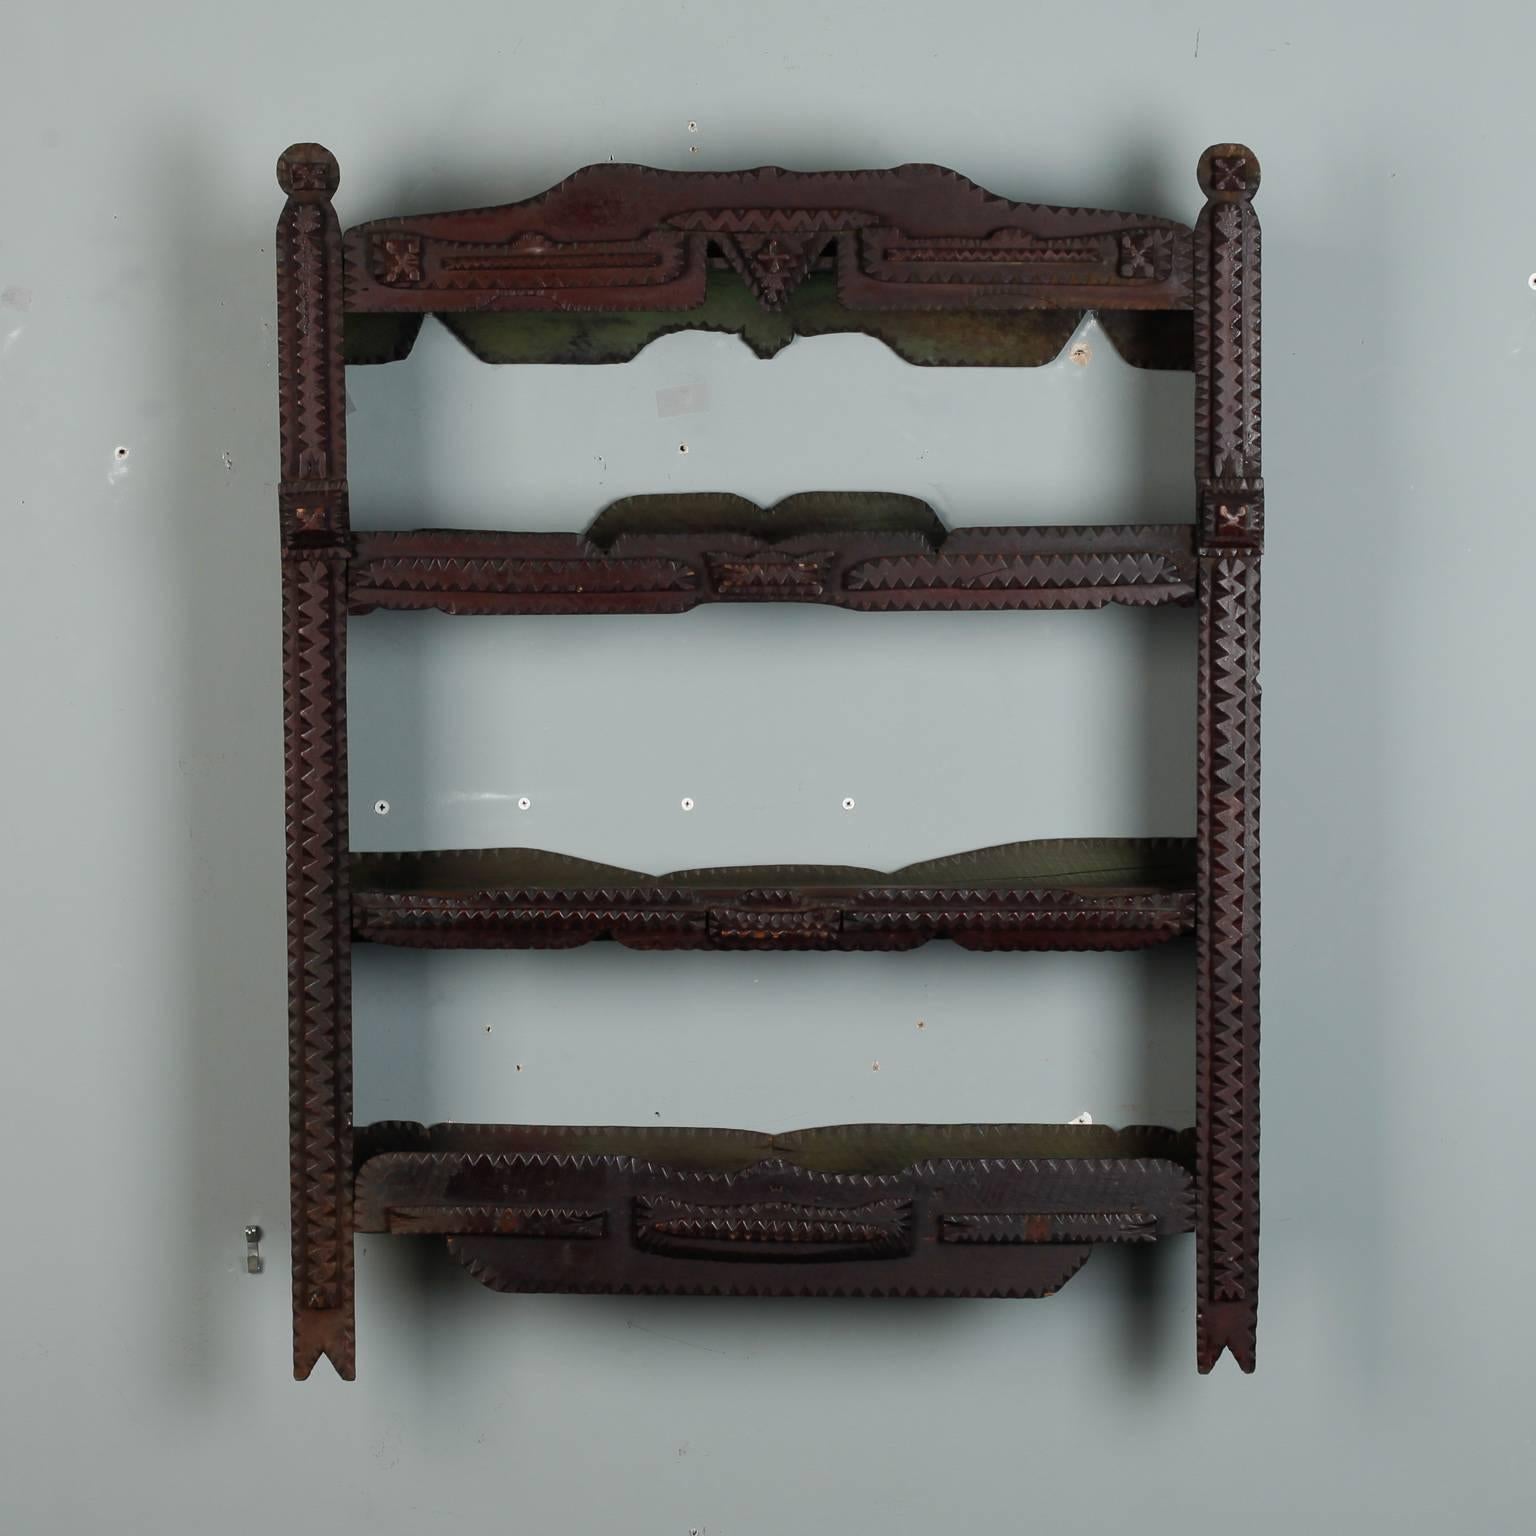 Wall mounted shelf unit dates from late 19th century - approximately 1880. Hand carved dark stained wood features classic tramp art design with saw tooth, notched edges. Found in Europe. 

Dimensions: 44” H x 35” W x 7” D

Retail: $2,495.00